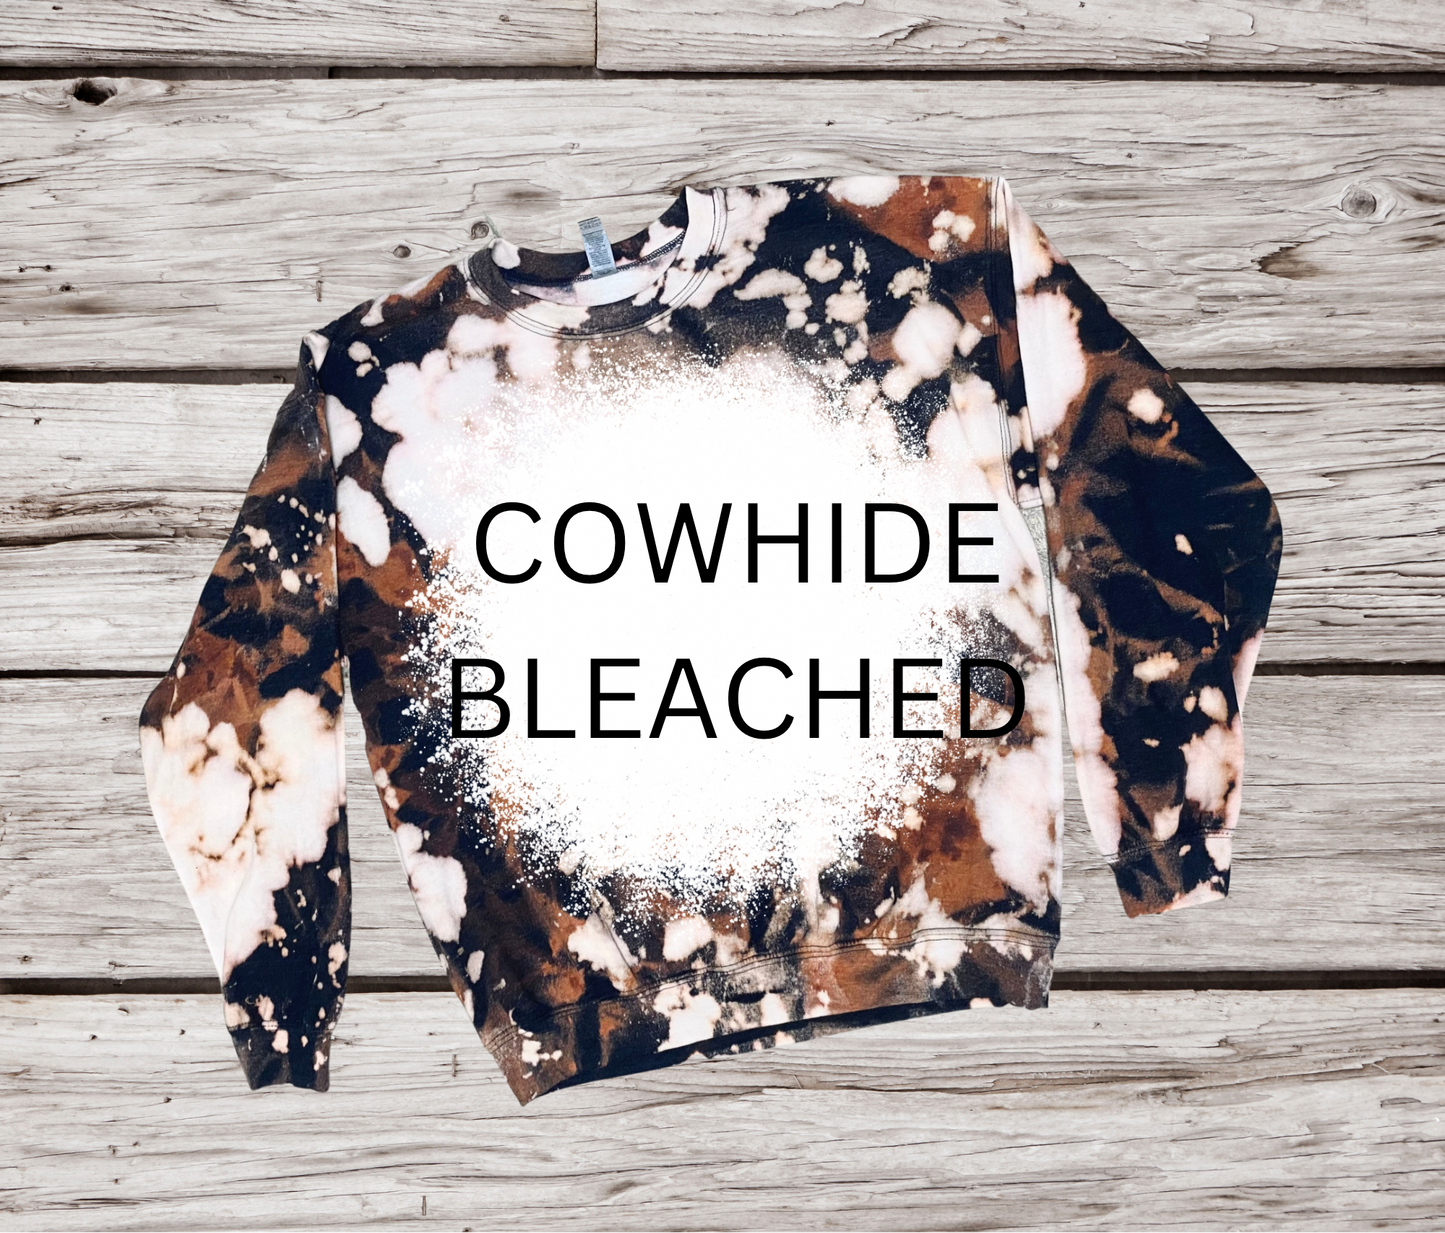 LONG LIVE COWGIRLS  DESIGN! YOU CHOOSE COLOR AND STYLE! TEE OR CREWNECK! BLEACHED OR NON-BLEACHED